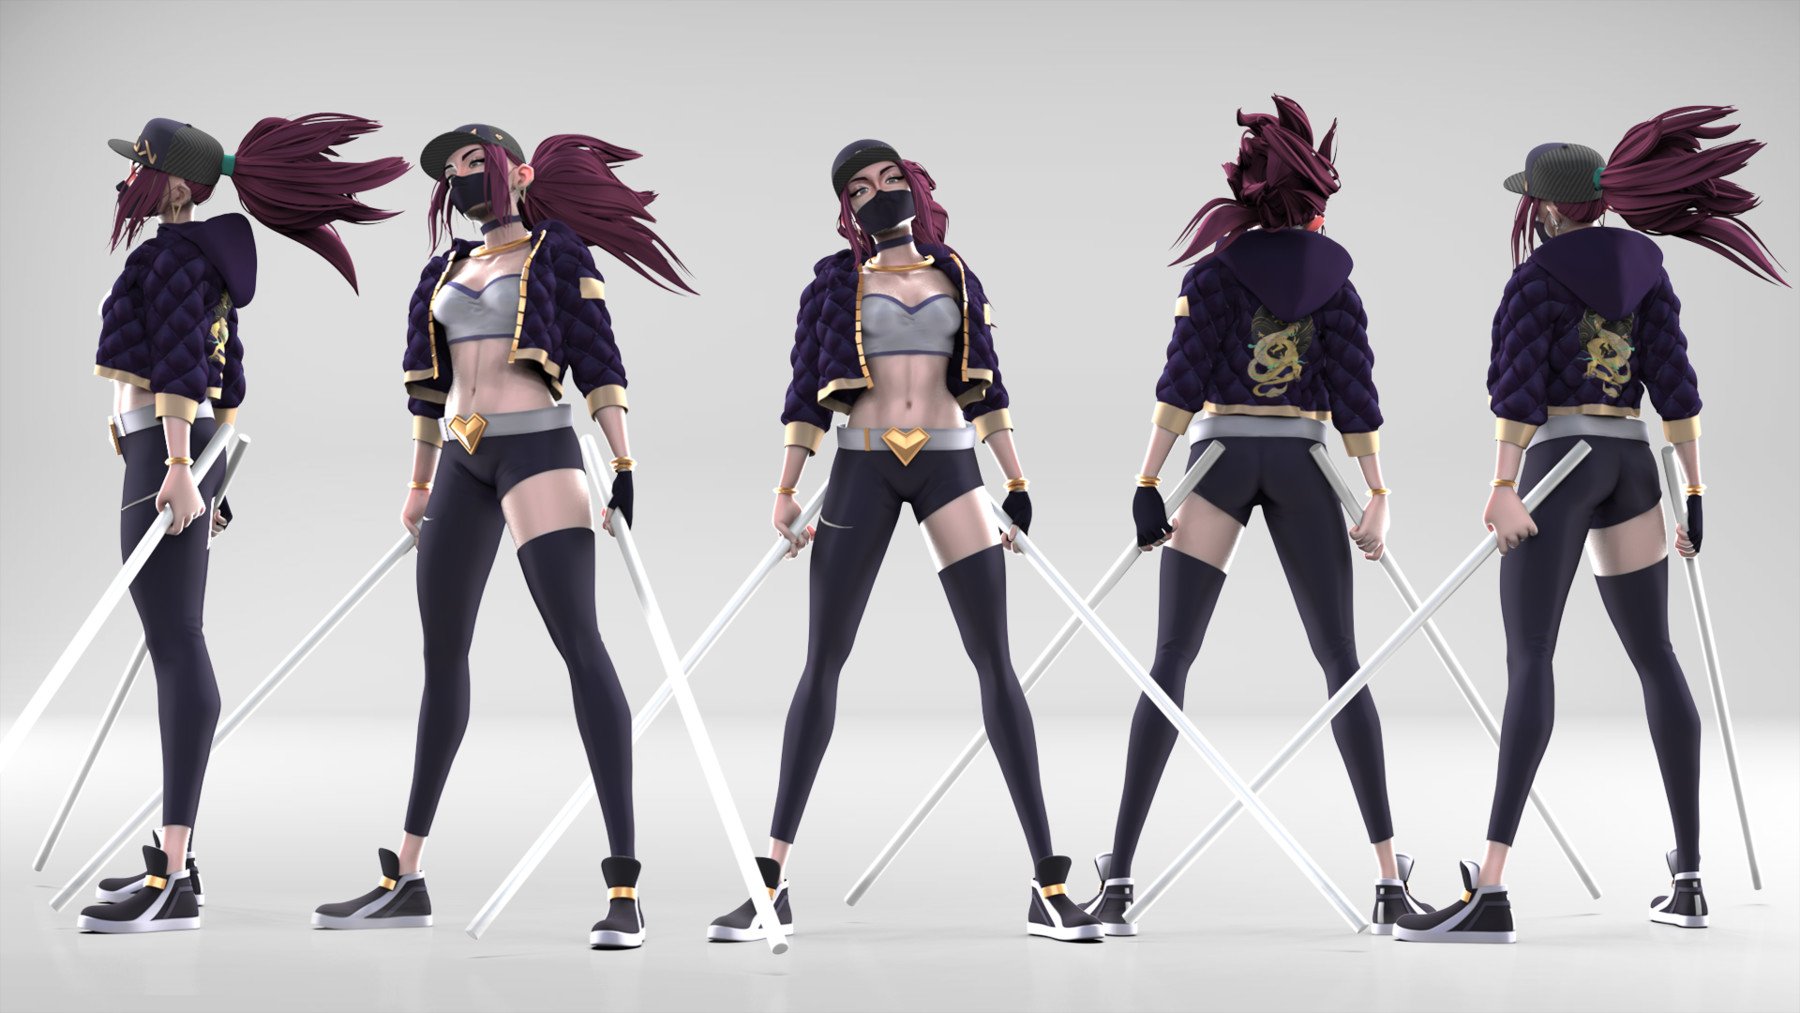 This is KDA Akali model re-created from K/DA -Pop/Start music video made by...